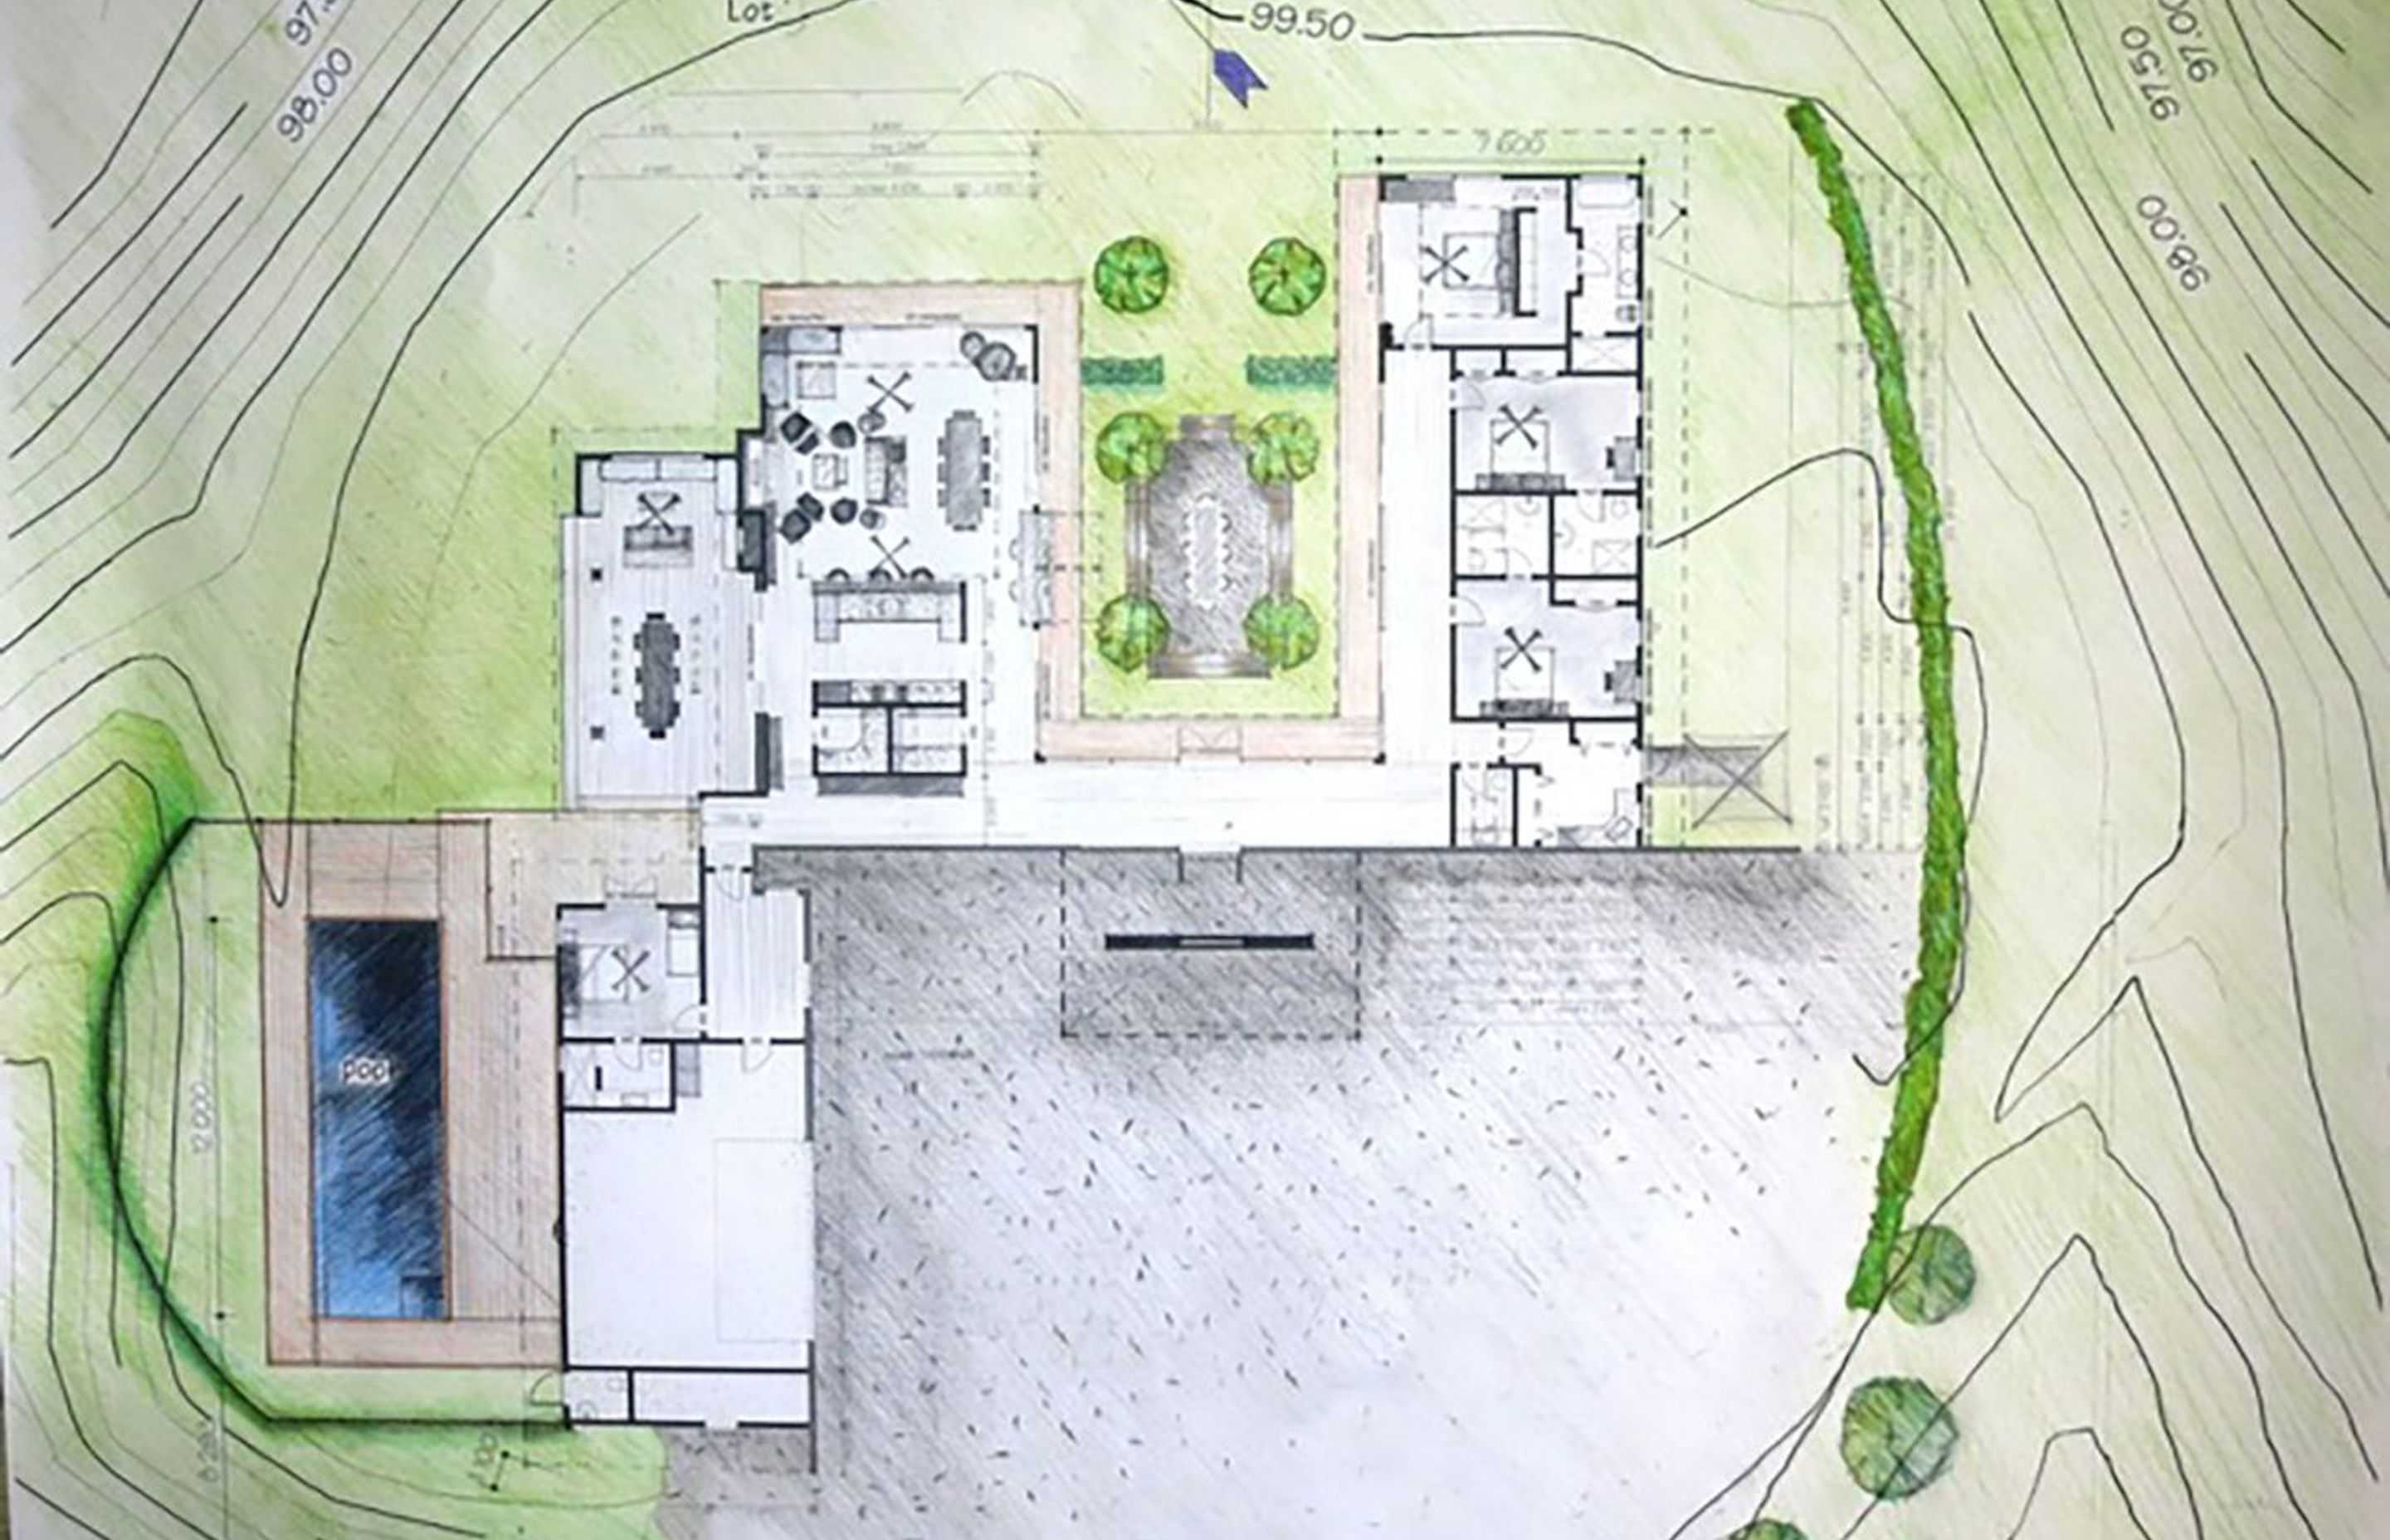 Sketch of the site plan for Poplars 7 home, by Andy Colthart Artchitecture and Development.